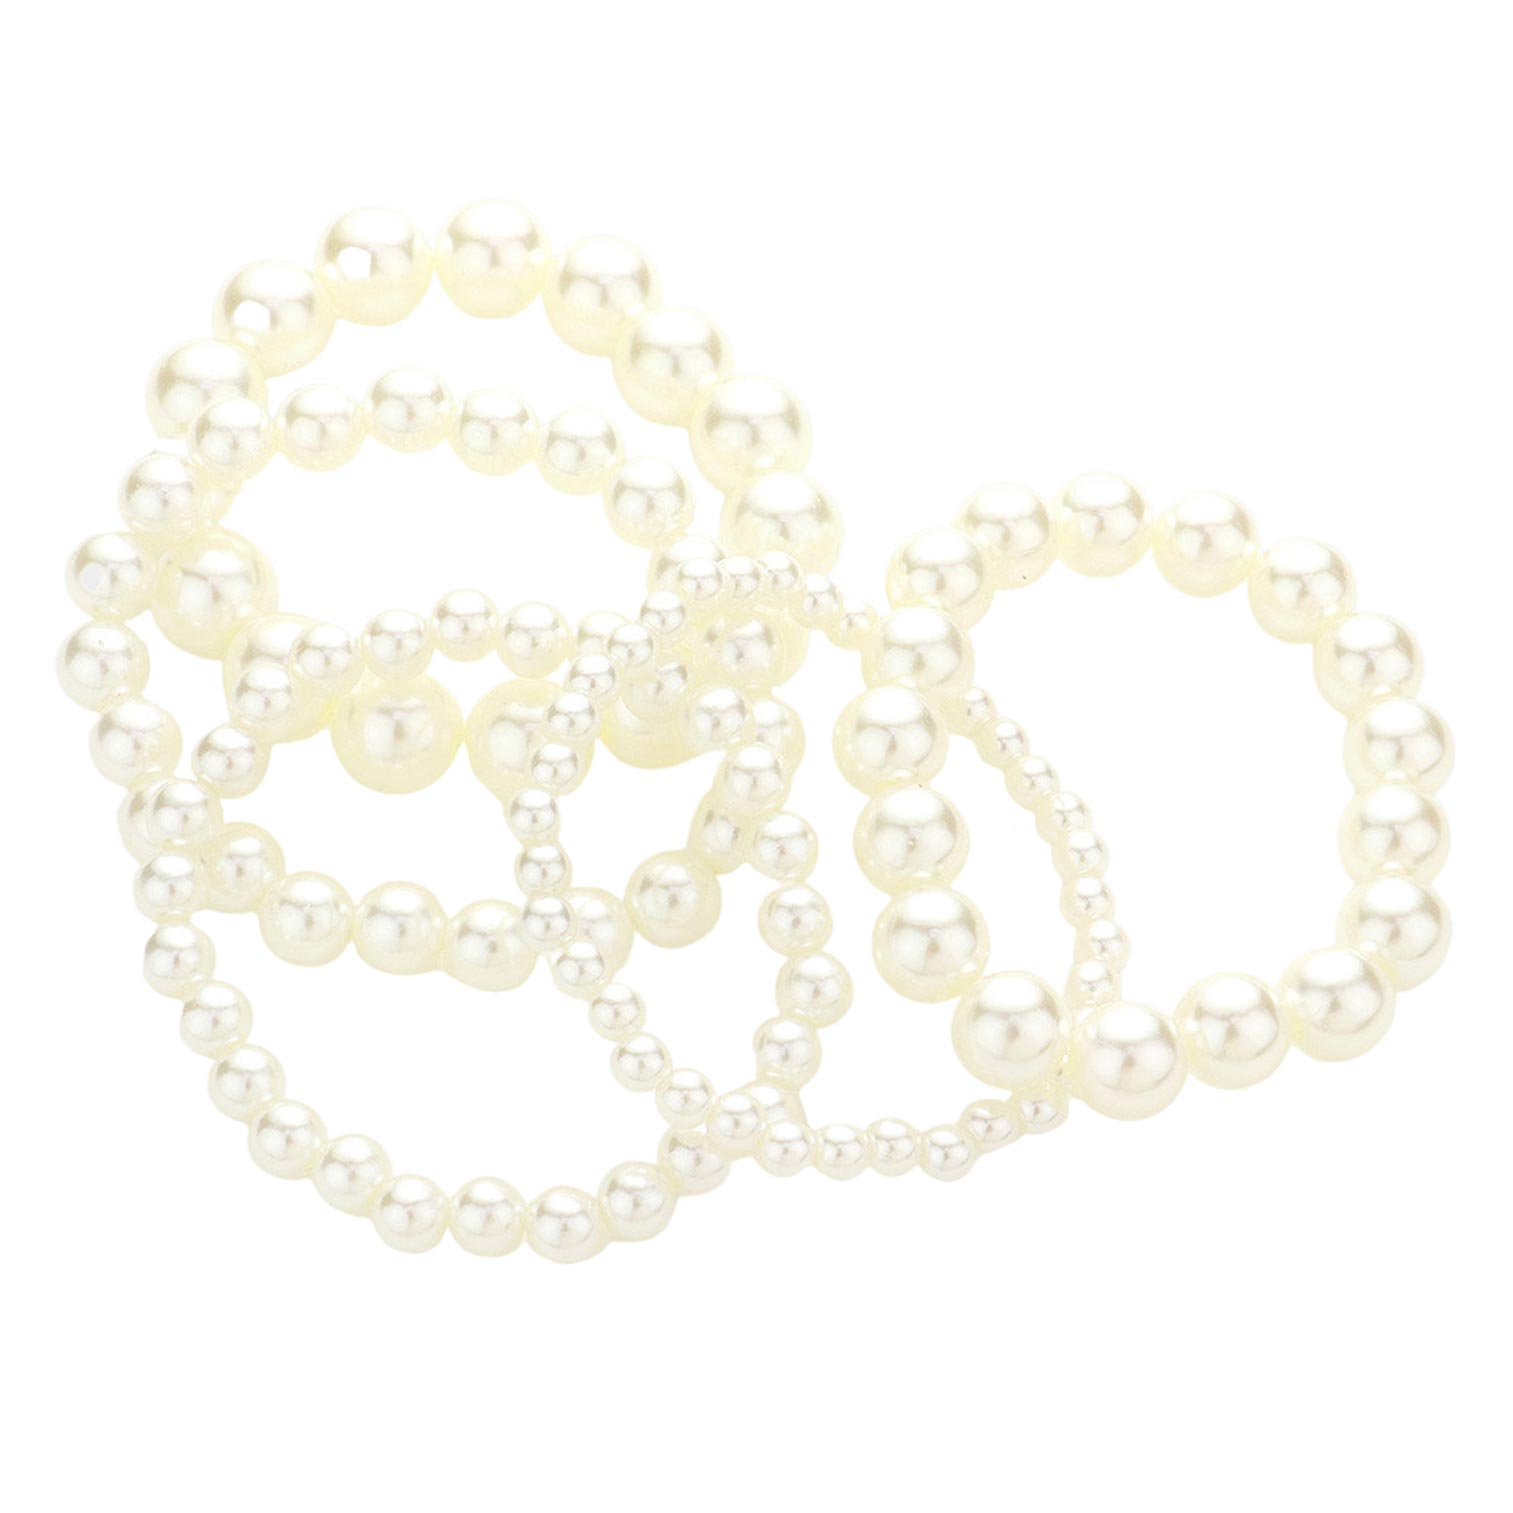 Cream 5PCS - Pearl Strand Stretch Bracelets, these Charm strand stretch bracelets can light up any outfit, and make you feel flawless. Perfect for adding just the right amount of shimmer & shine and a touch of class to special events. Fabulous fashion and sleek style add a pop of pretty color to your attire.